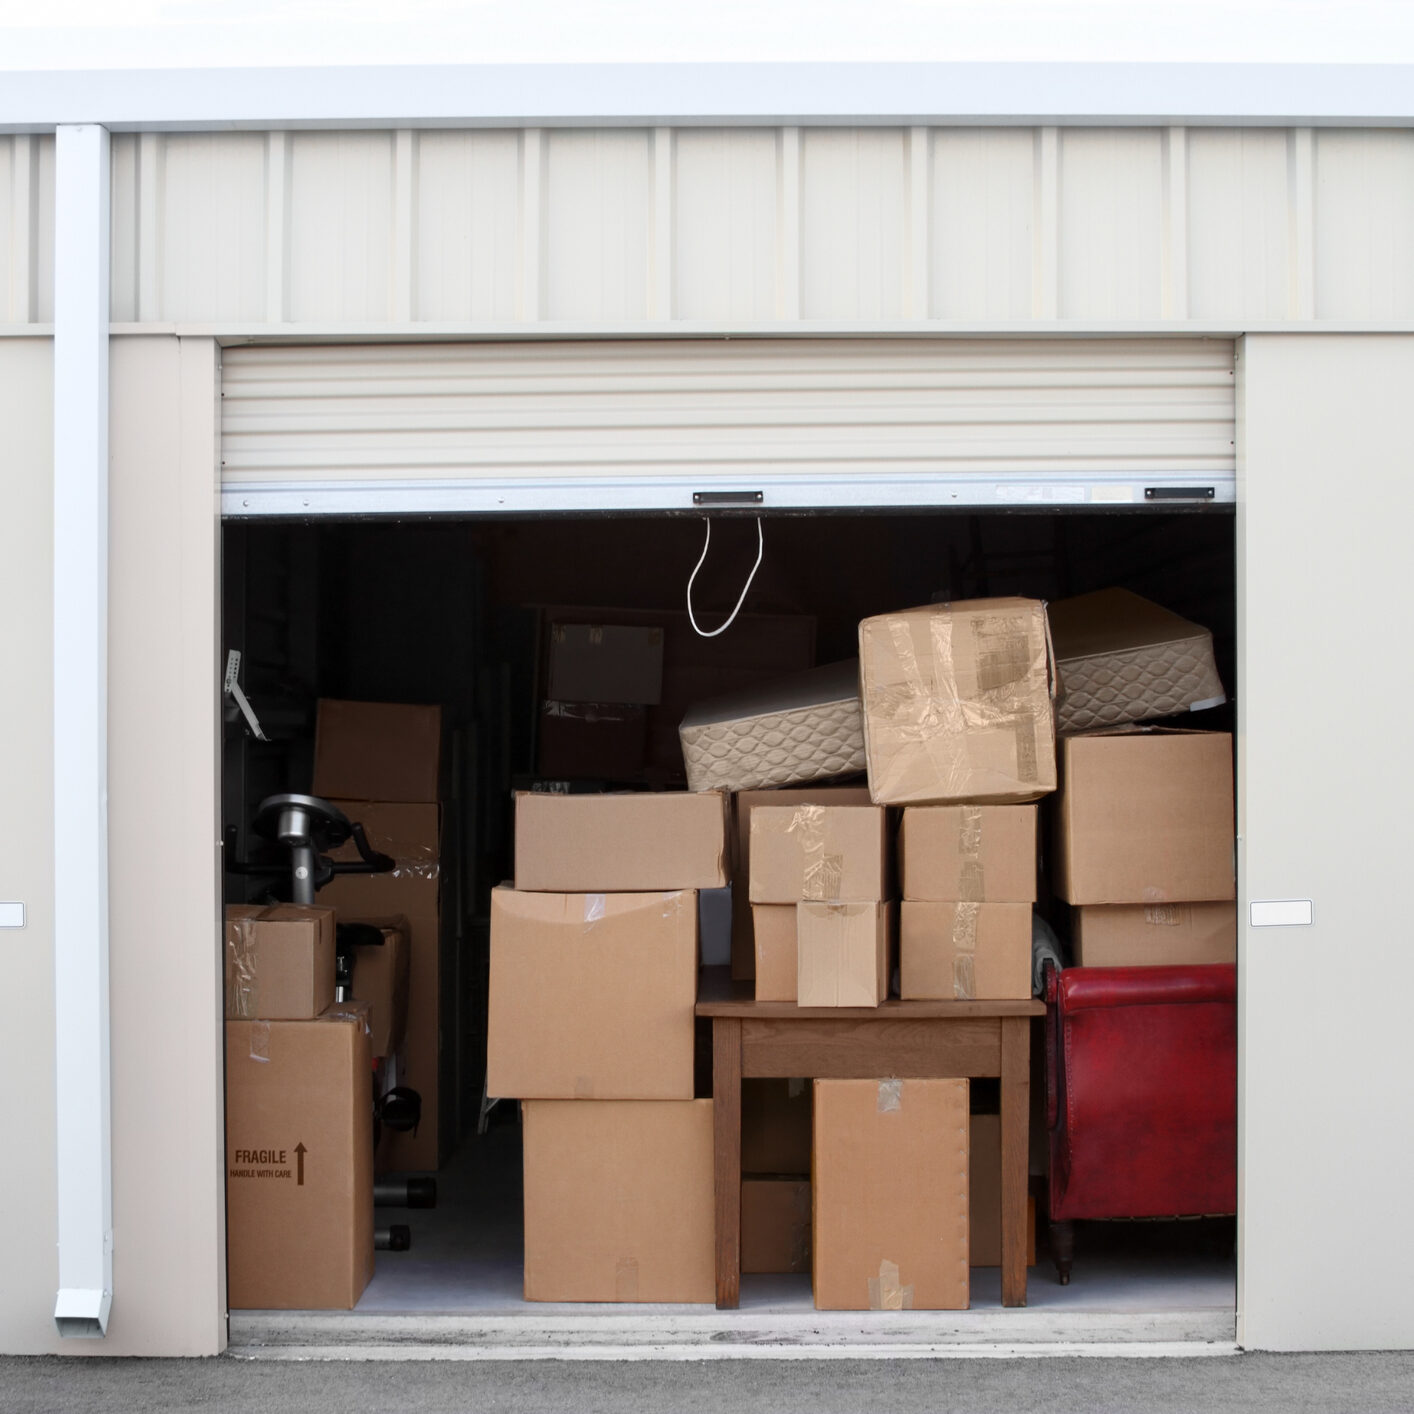 Warehouse building with self storage units. Self storage facility. Roll up doors on self storage facility. One door open with boxes and furniture in doorway.